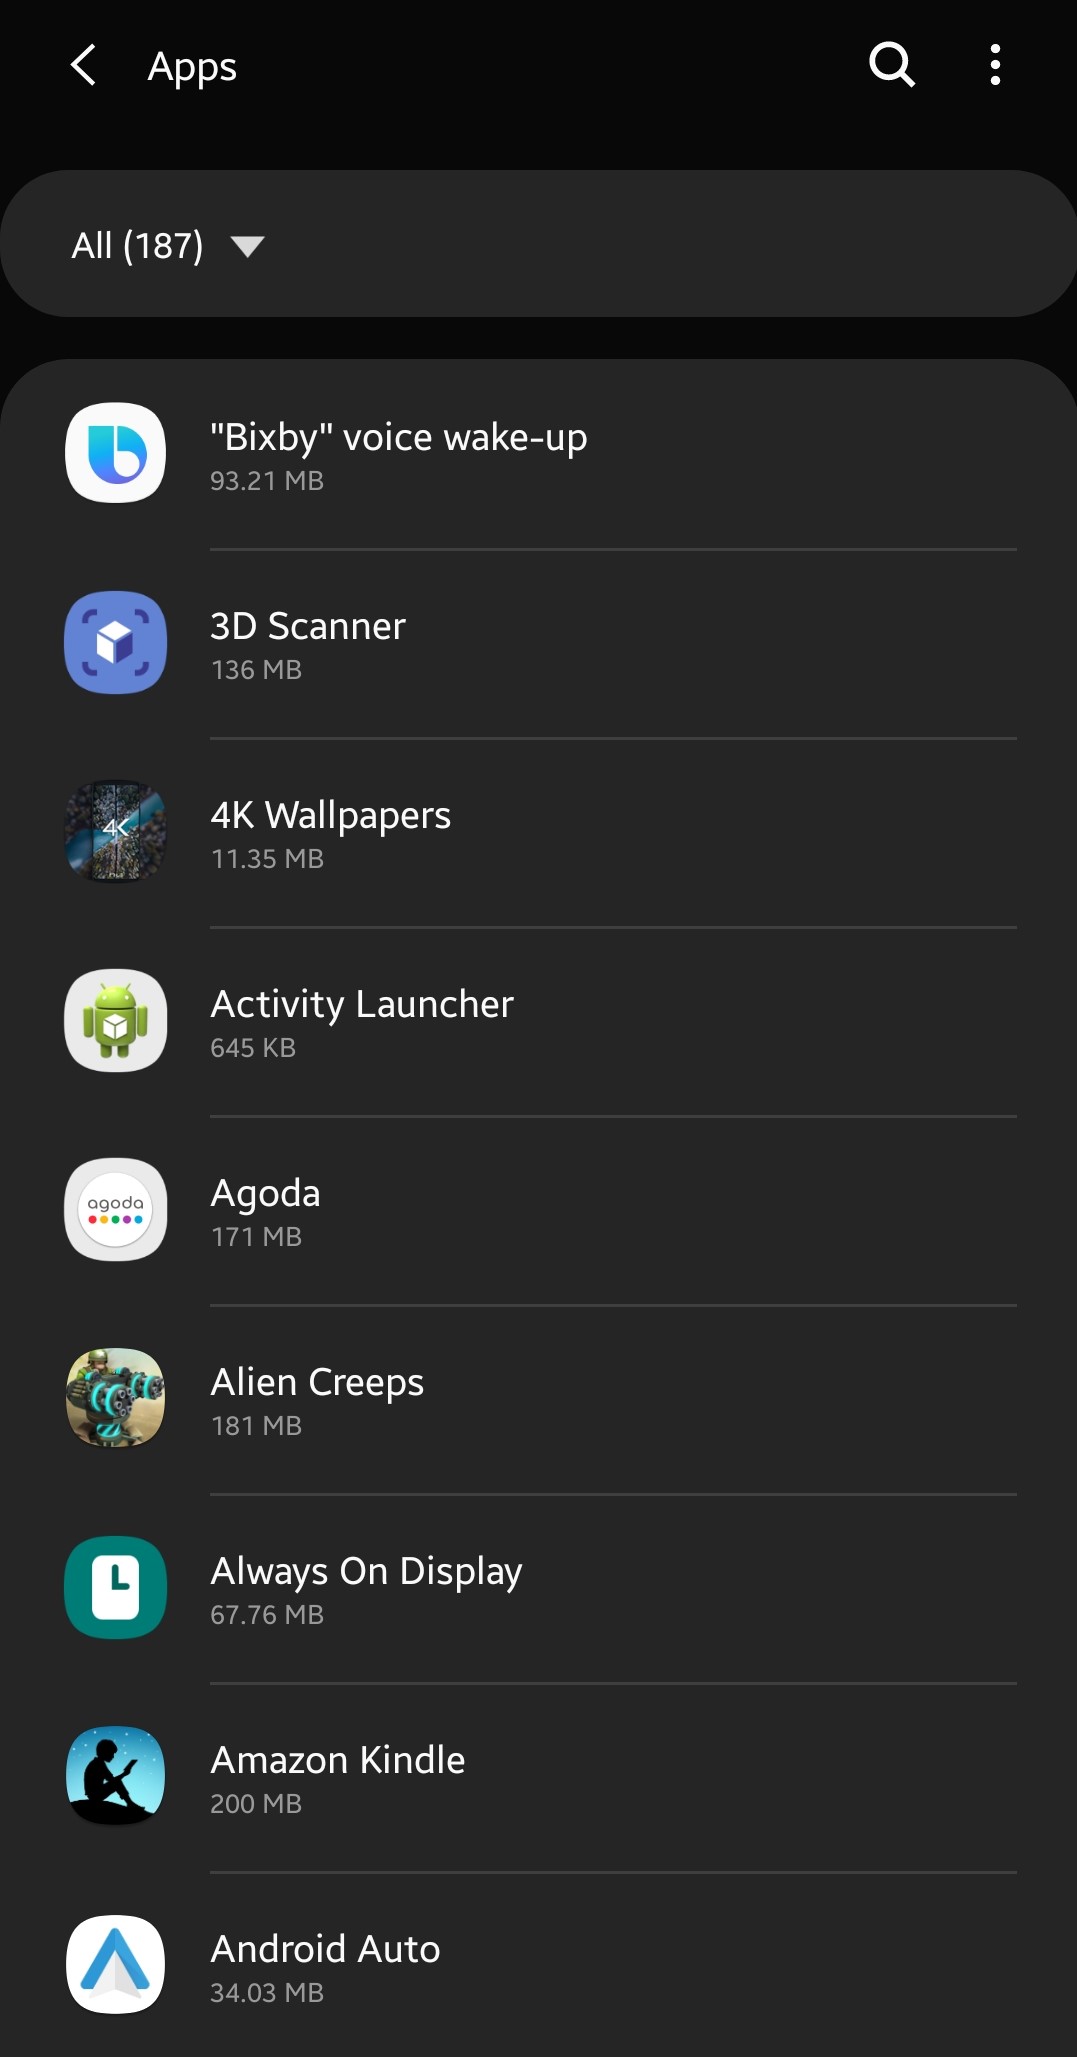 List of Apps